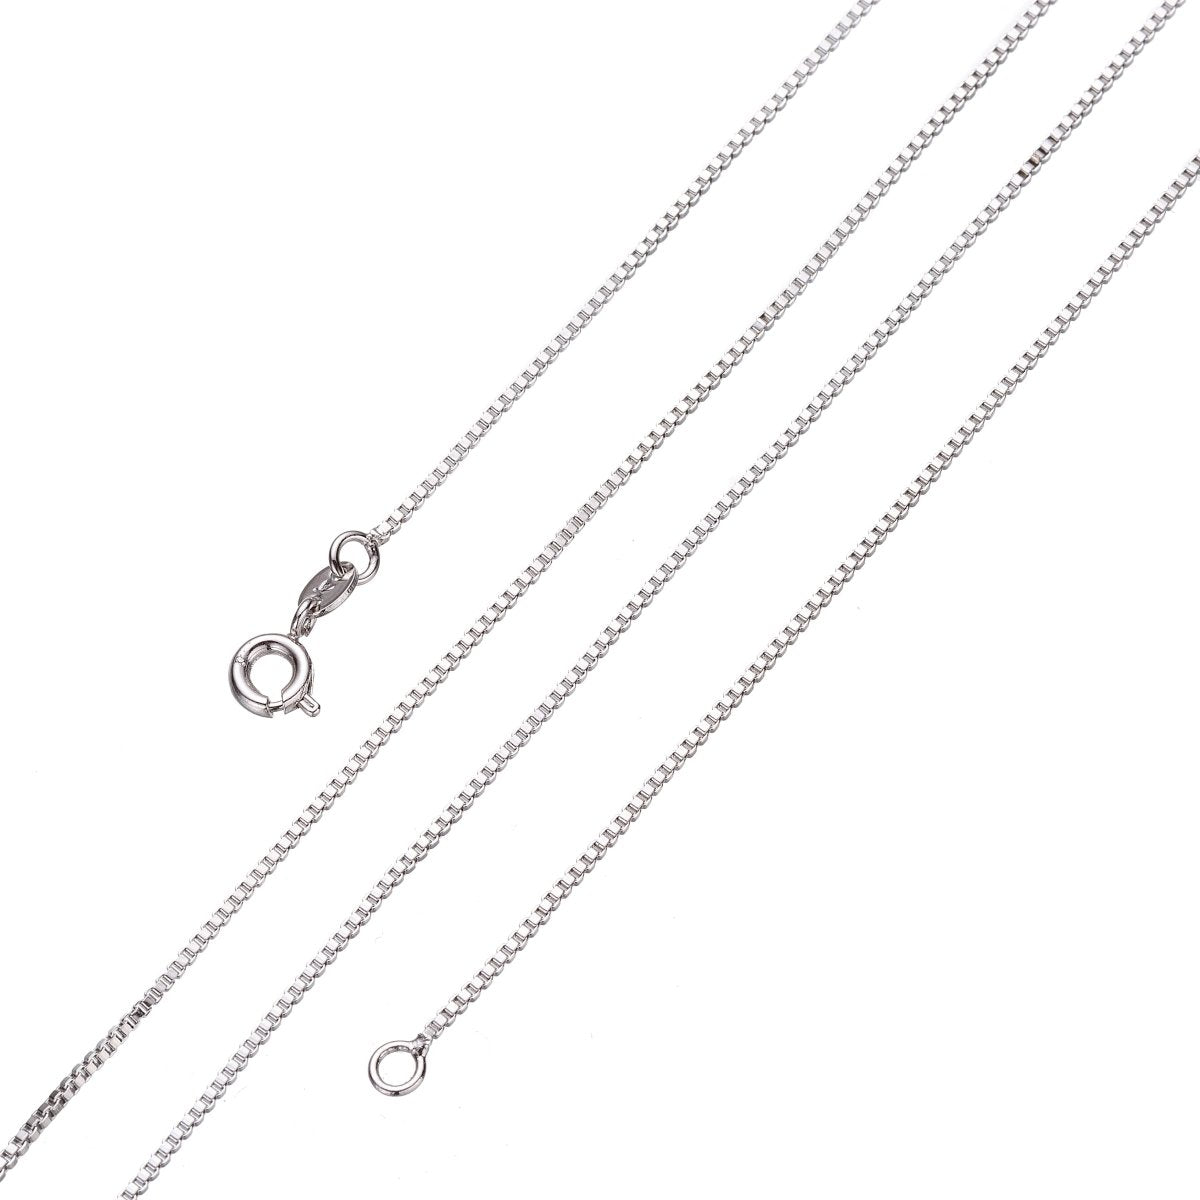 Silver Box Chain Necklace, Dainty Silver Necklace, Dainty Finished Silver Chain 16 inch 1mm Ready to wear Silver Chain | WA-235 Clearance Pricing - DLUXCA